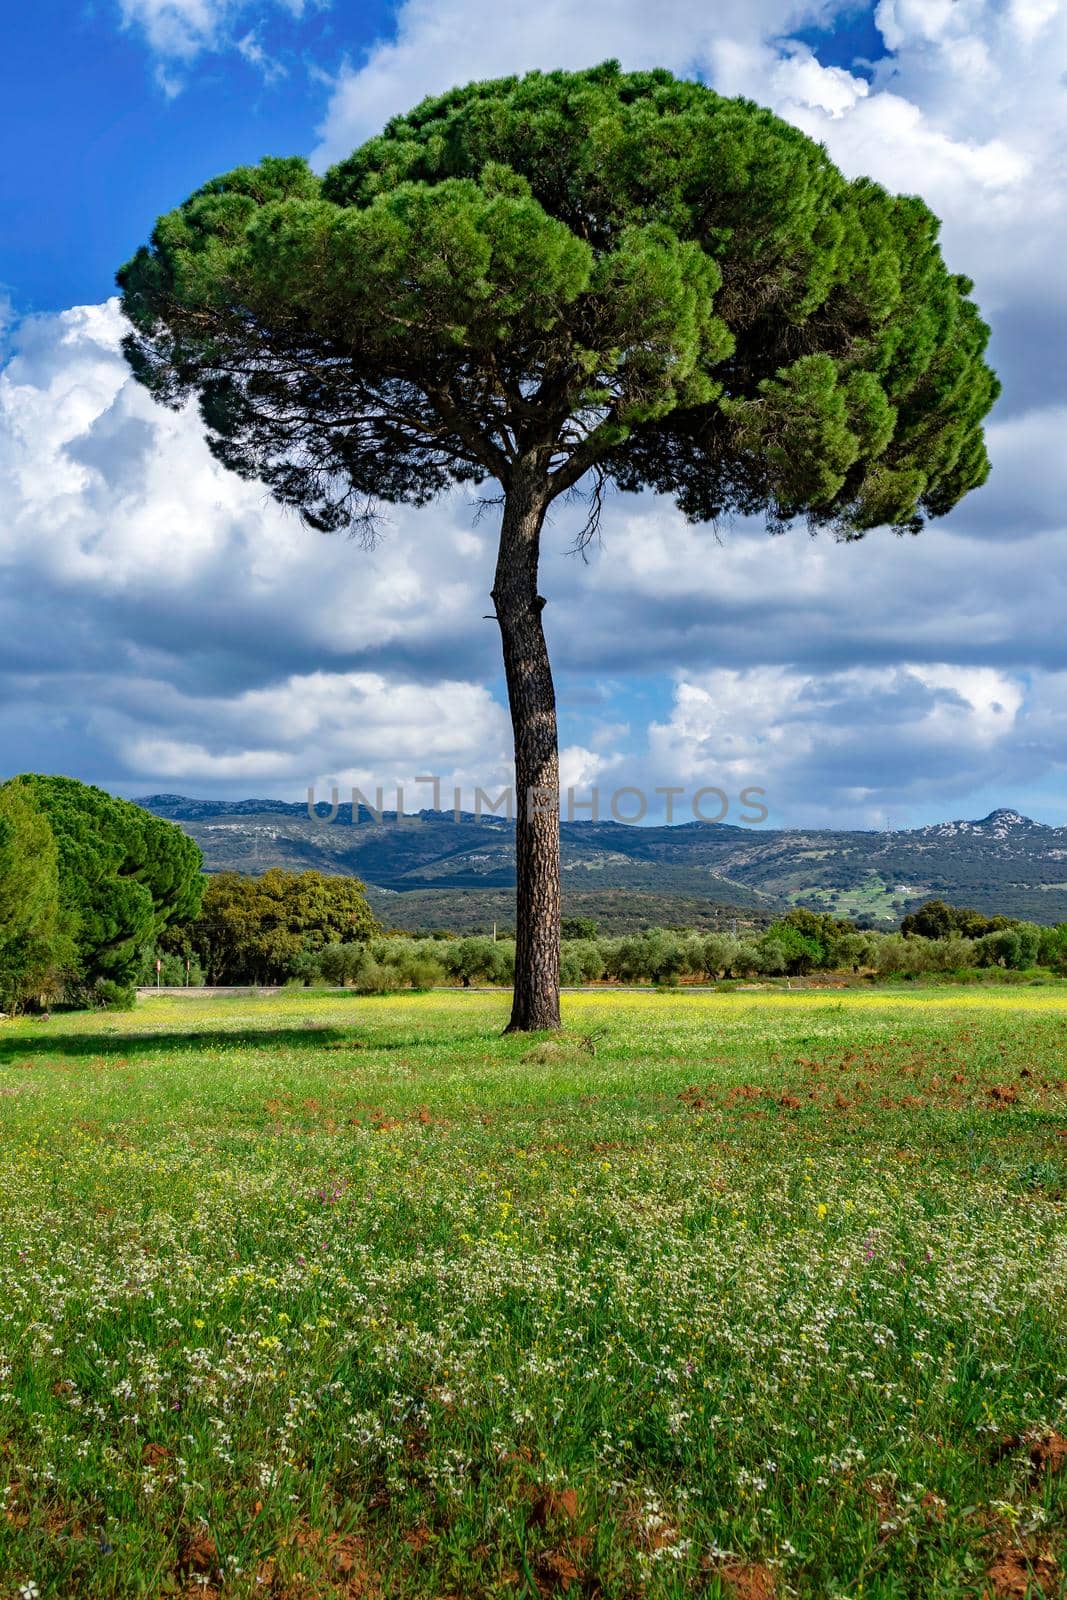 stone pine (Pinus pinea) in a green meadow with flowers and cloudy sky by joseantona